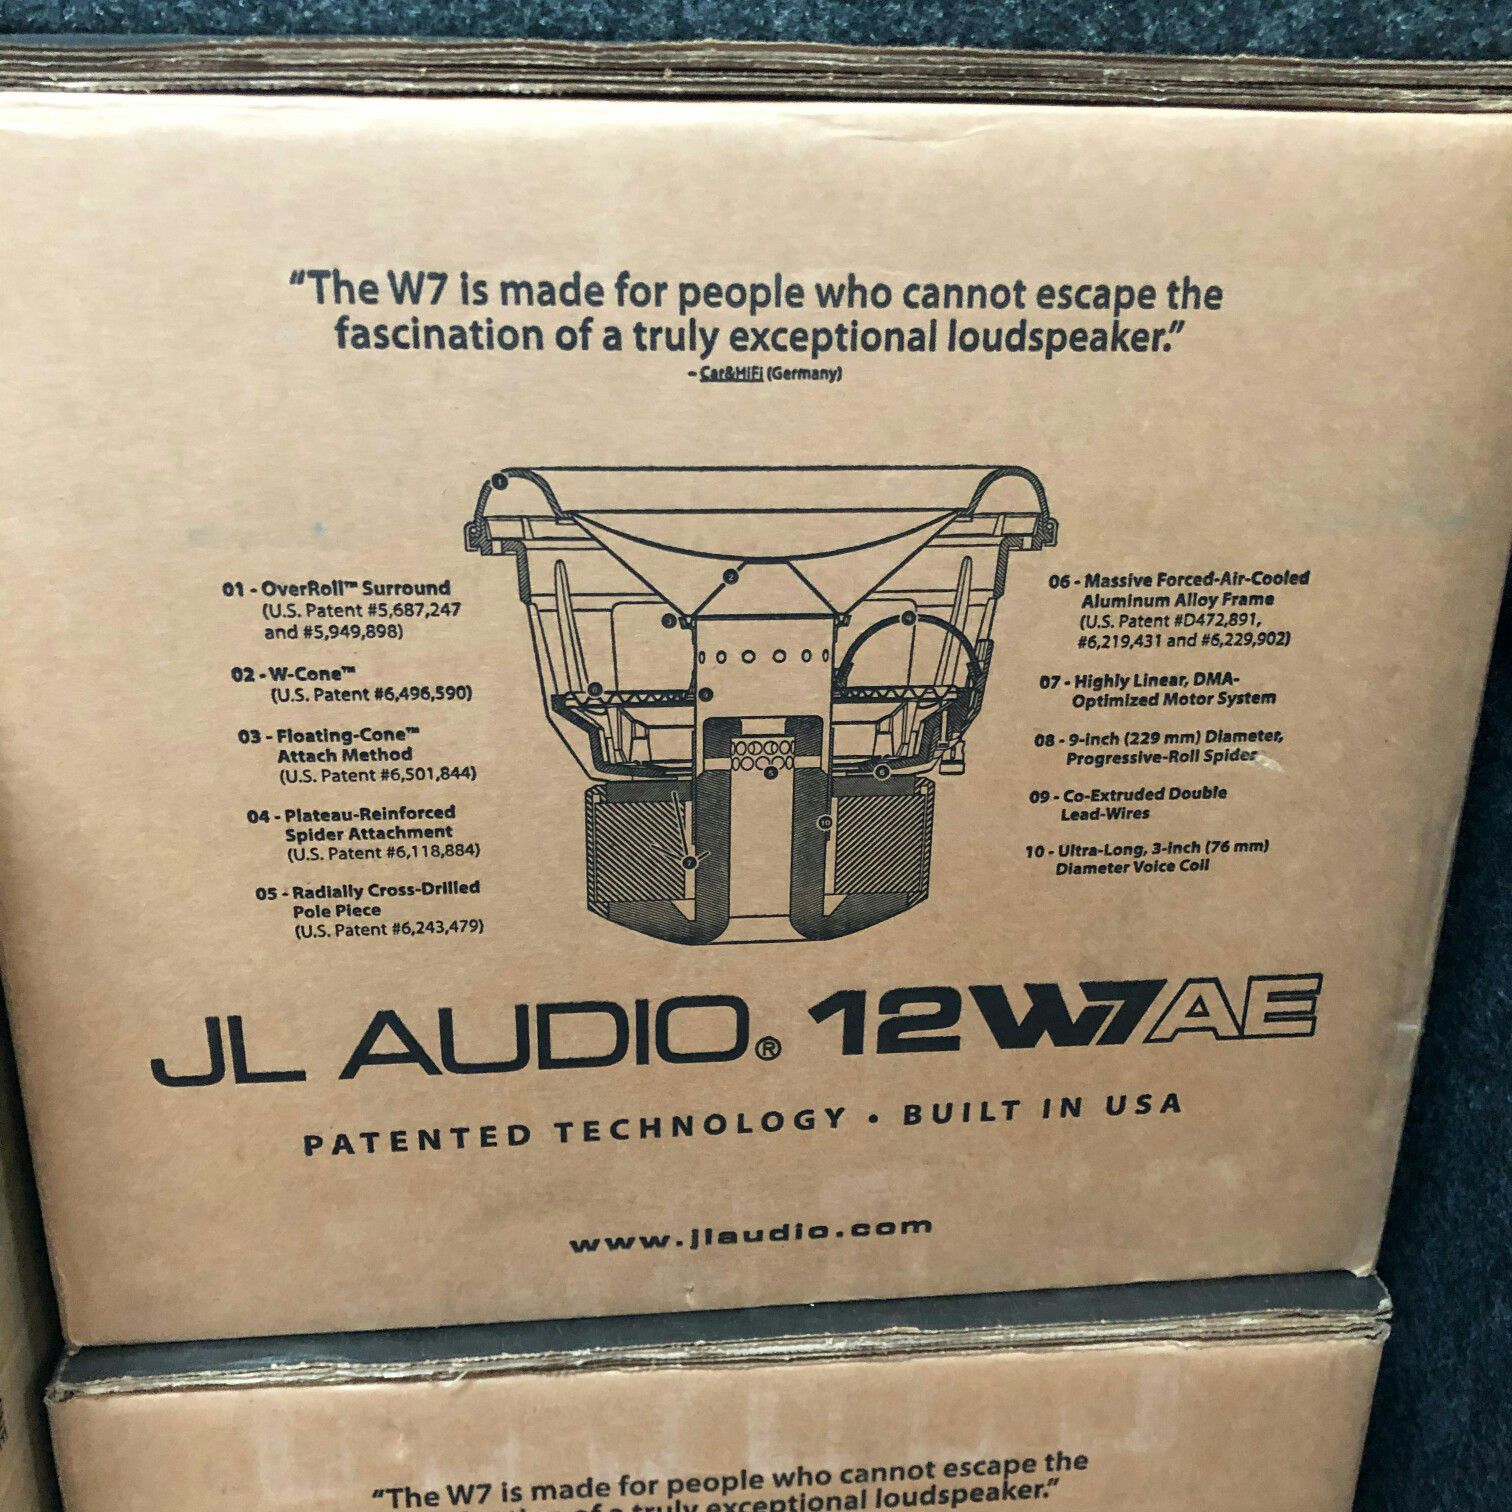 Jl audio 12w7ae on special today get the loudest sub around today